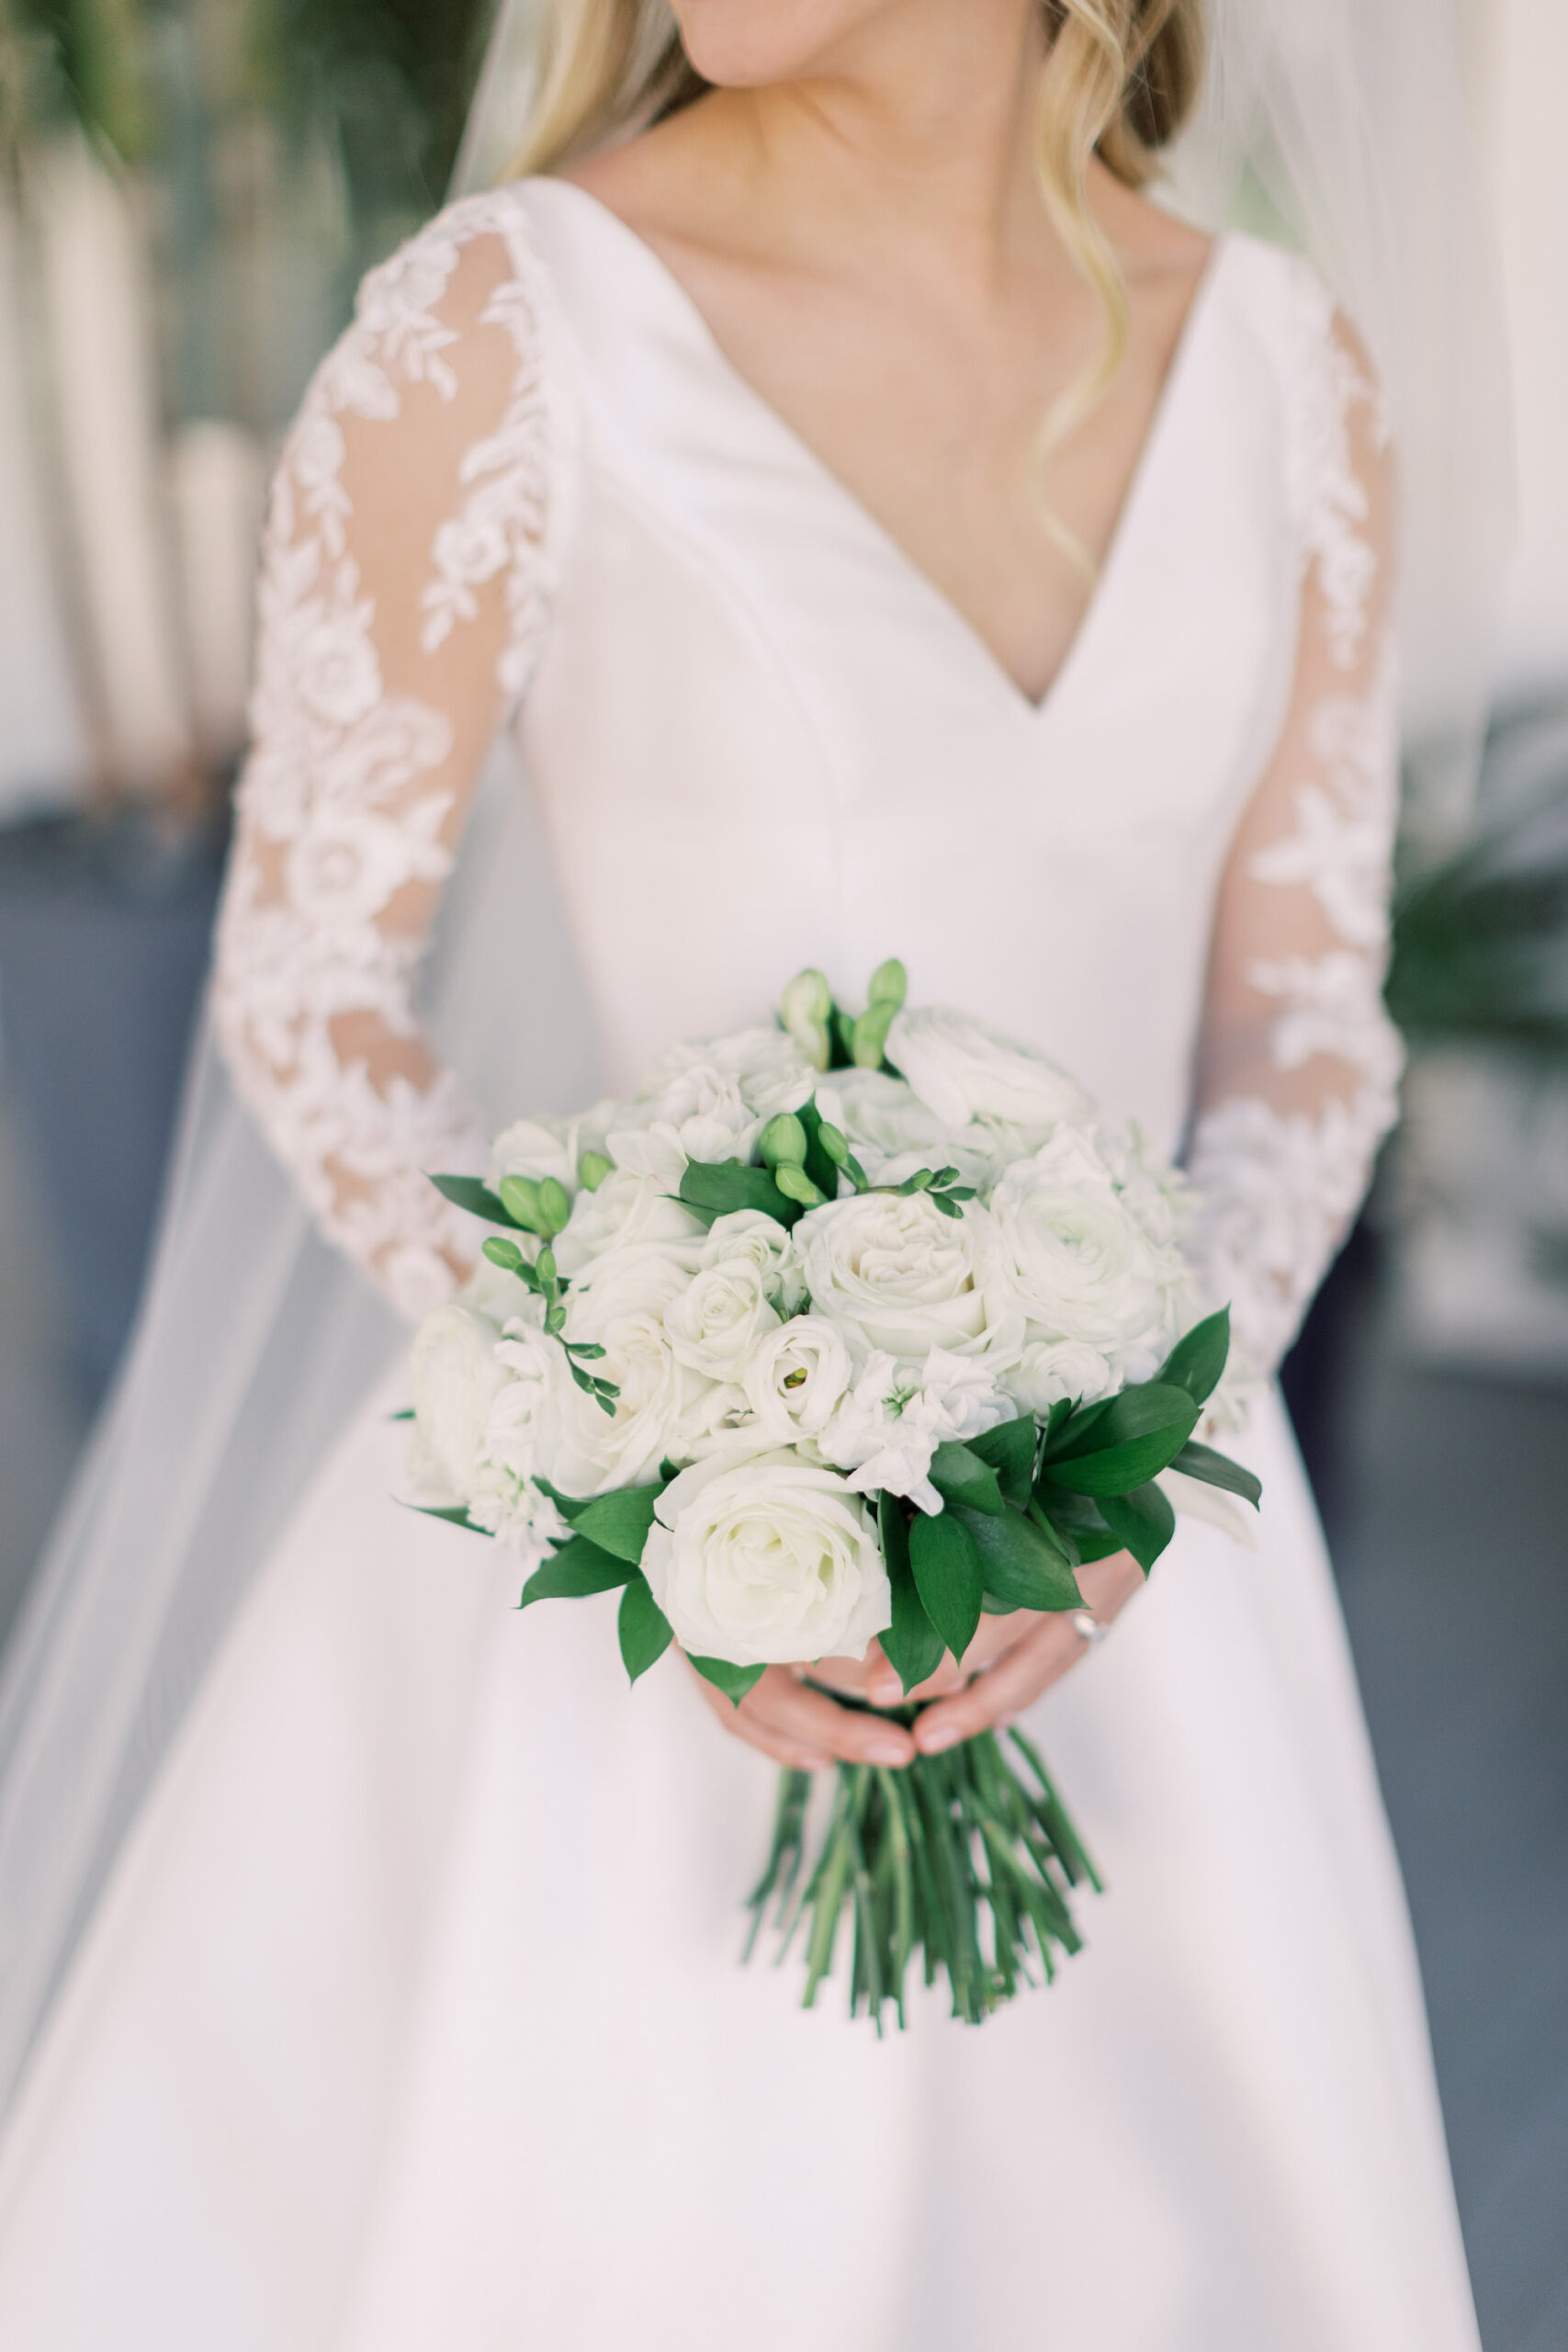 Vintage Blue Wedding, Tampa Bride Wedding Portrait Wearing Silk V Neckline Wedding Dress with Lace and Illusion Long Sleeves Holding White Roses and Greenery Floral Bouquet | Tampa Bay Wedding Florist Bruce Wayne Florals